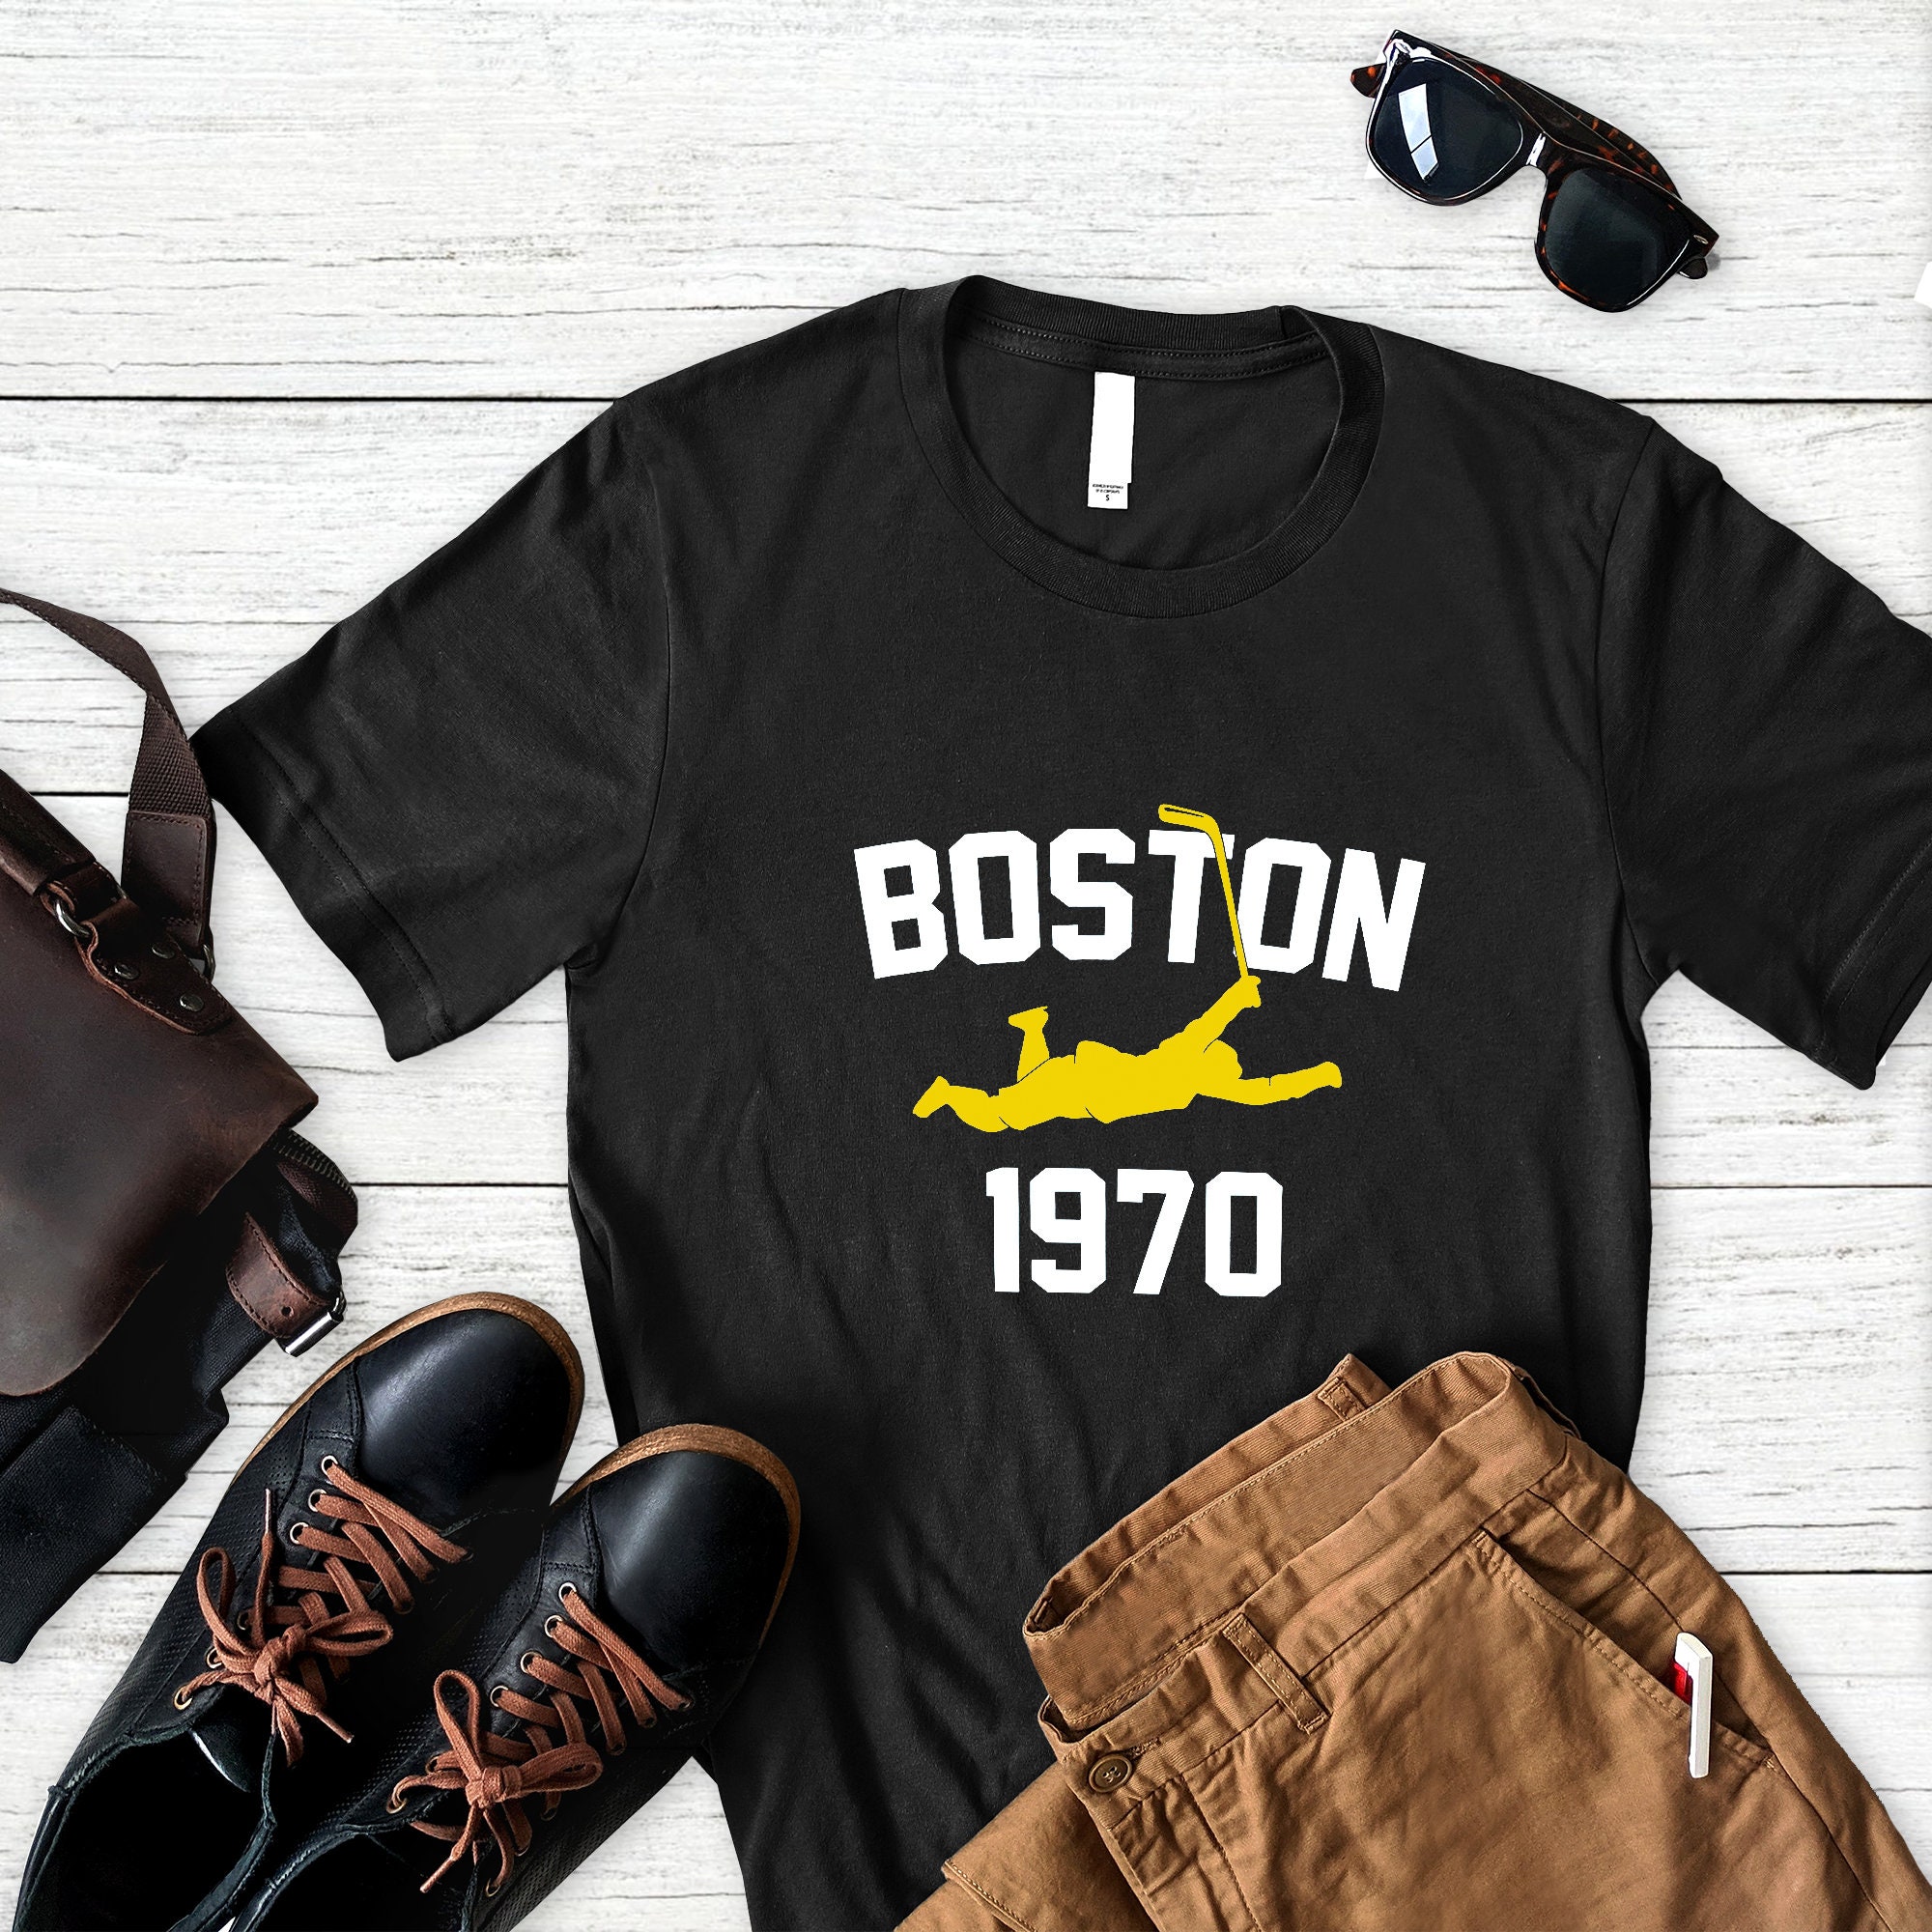 Bobby Orr Number 4 The Yellow Stencil Boston Bruins Unisex T-Shirt